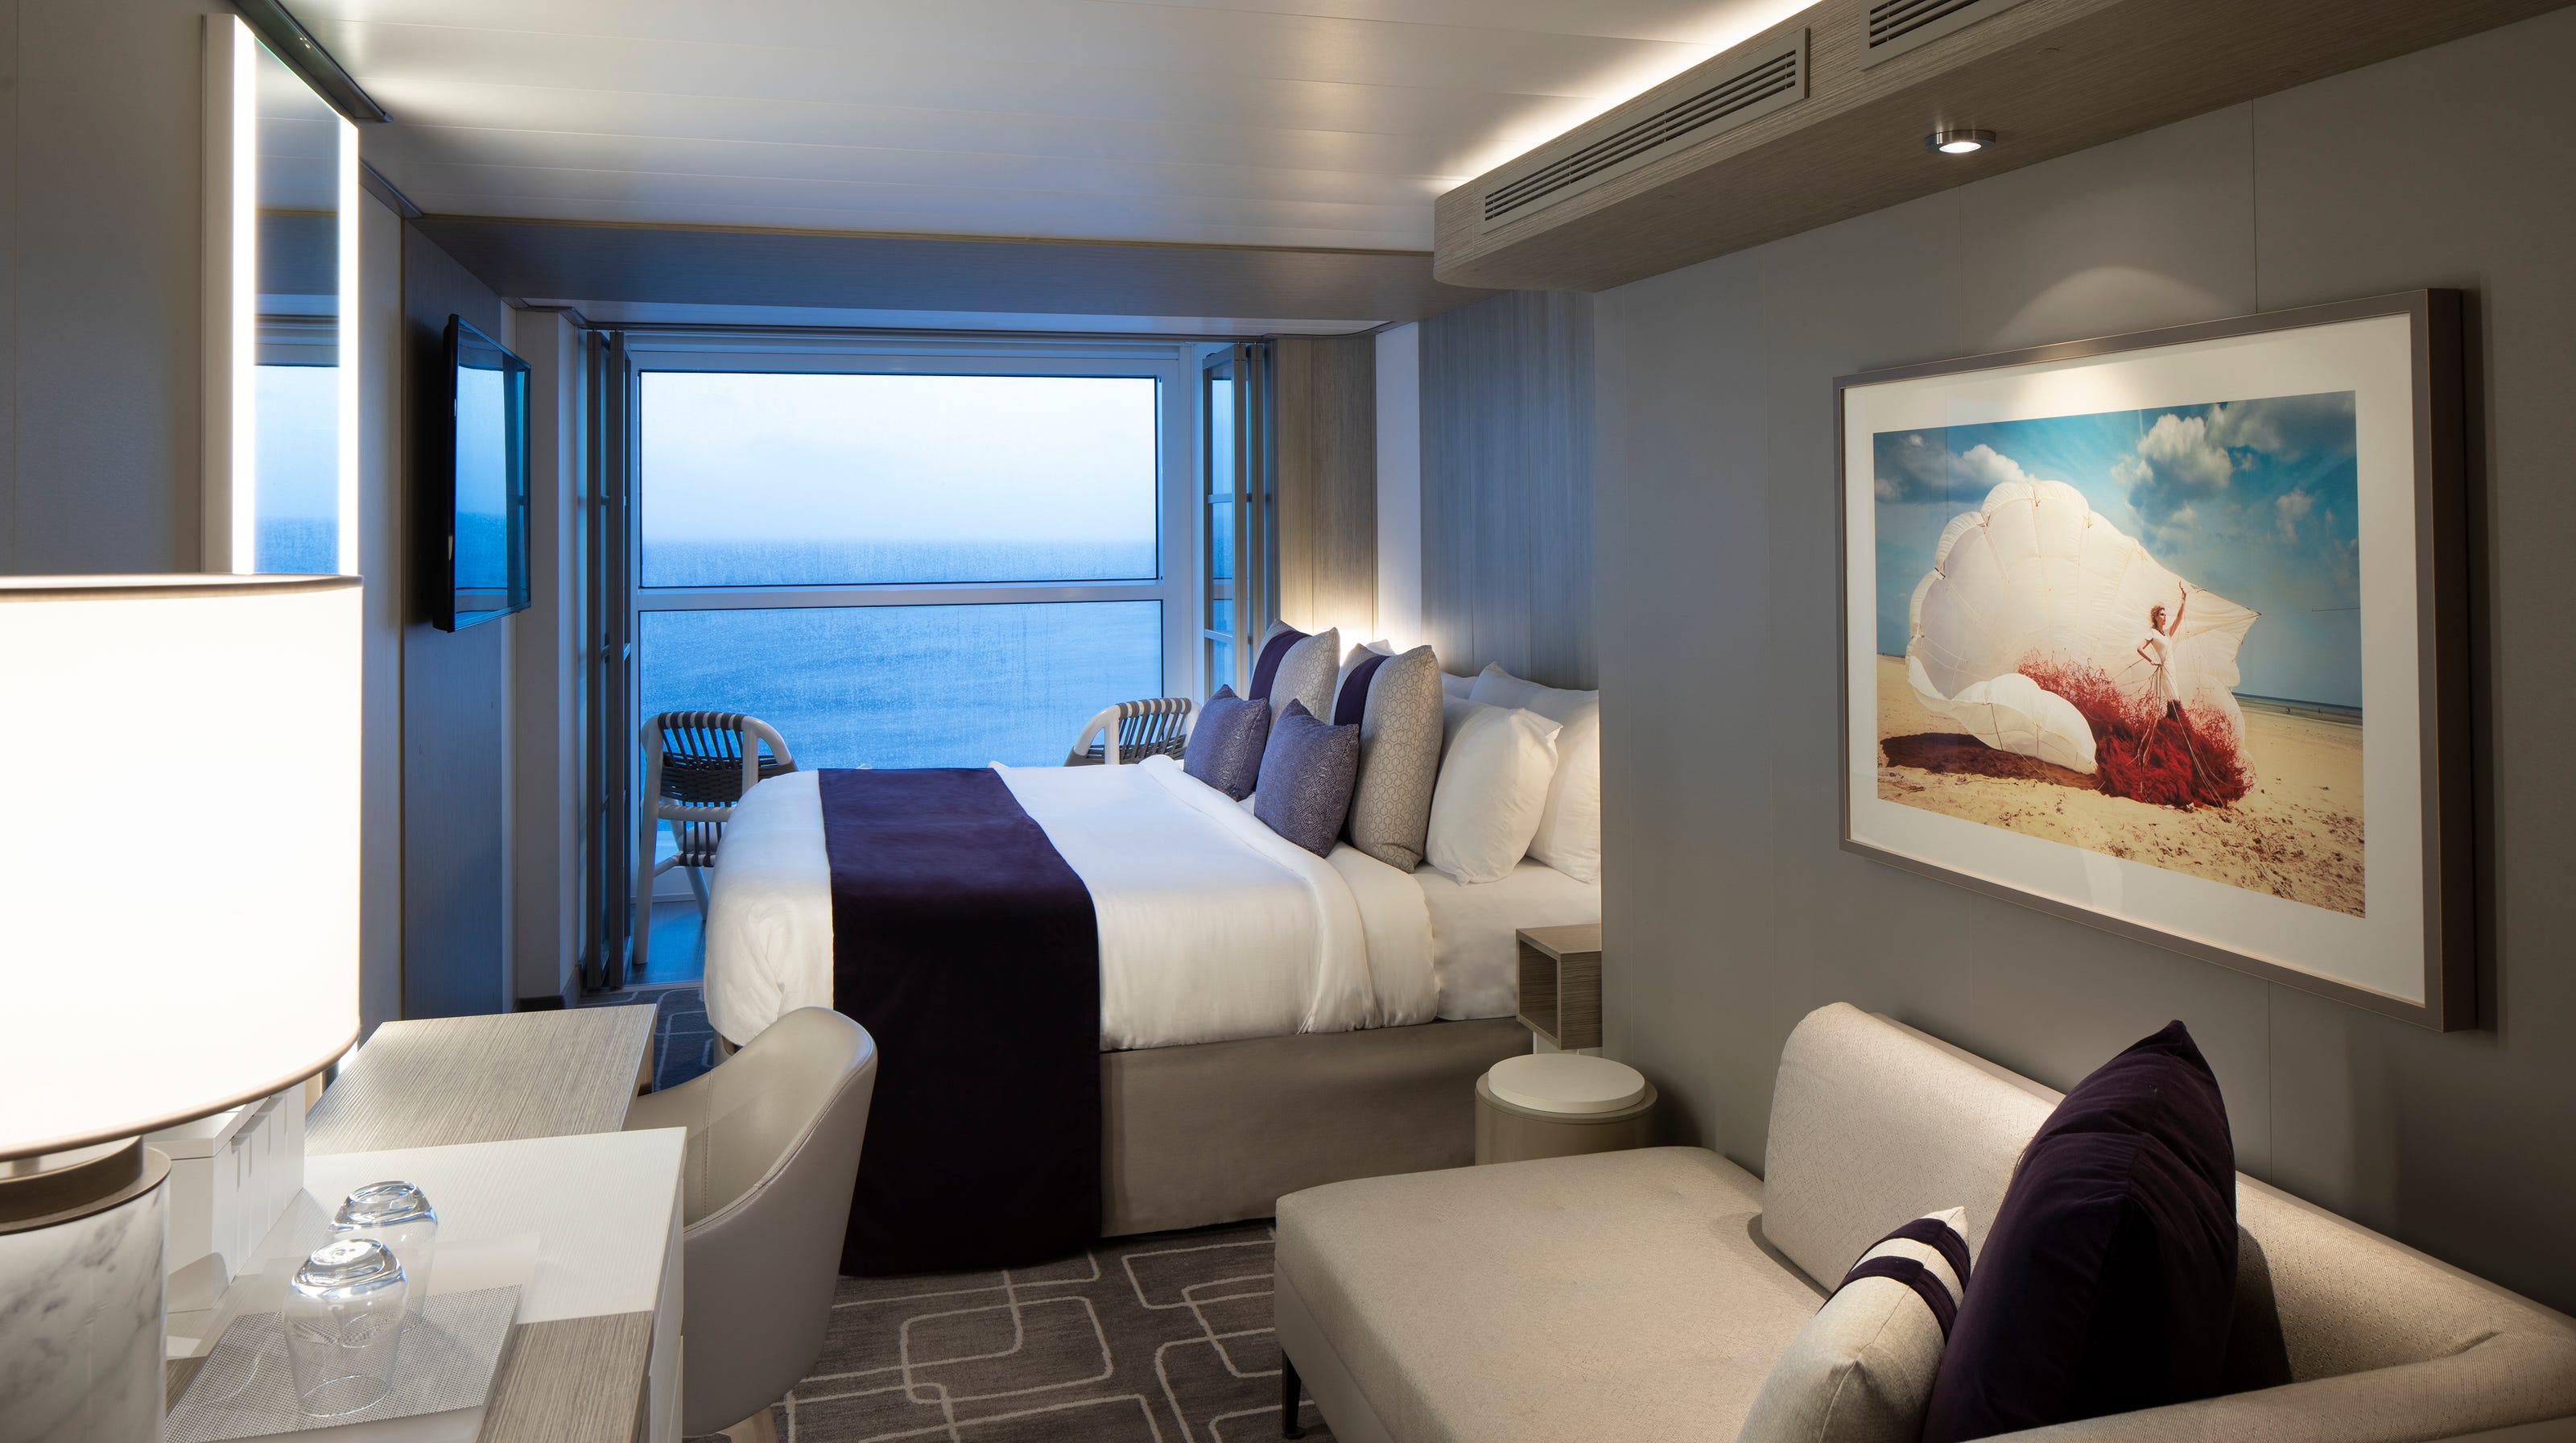 Celebrity Edge New Cruise Ships Cabins Have Walls Of Glass 